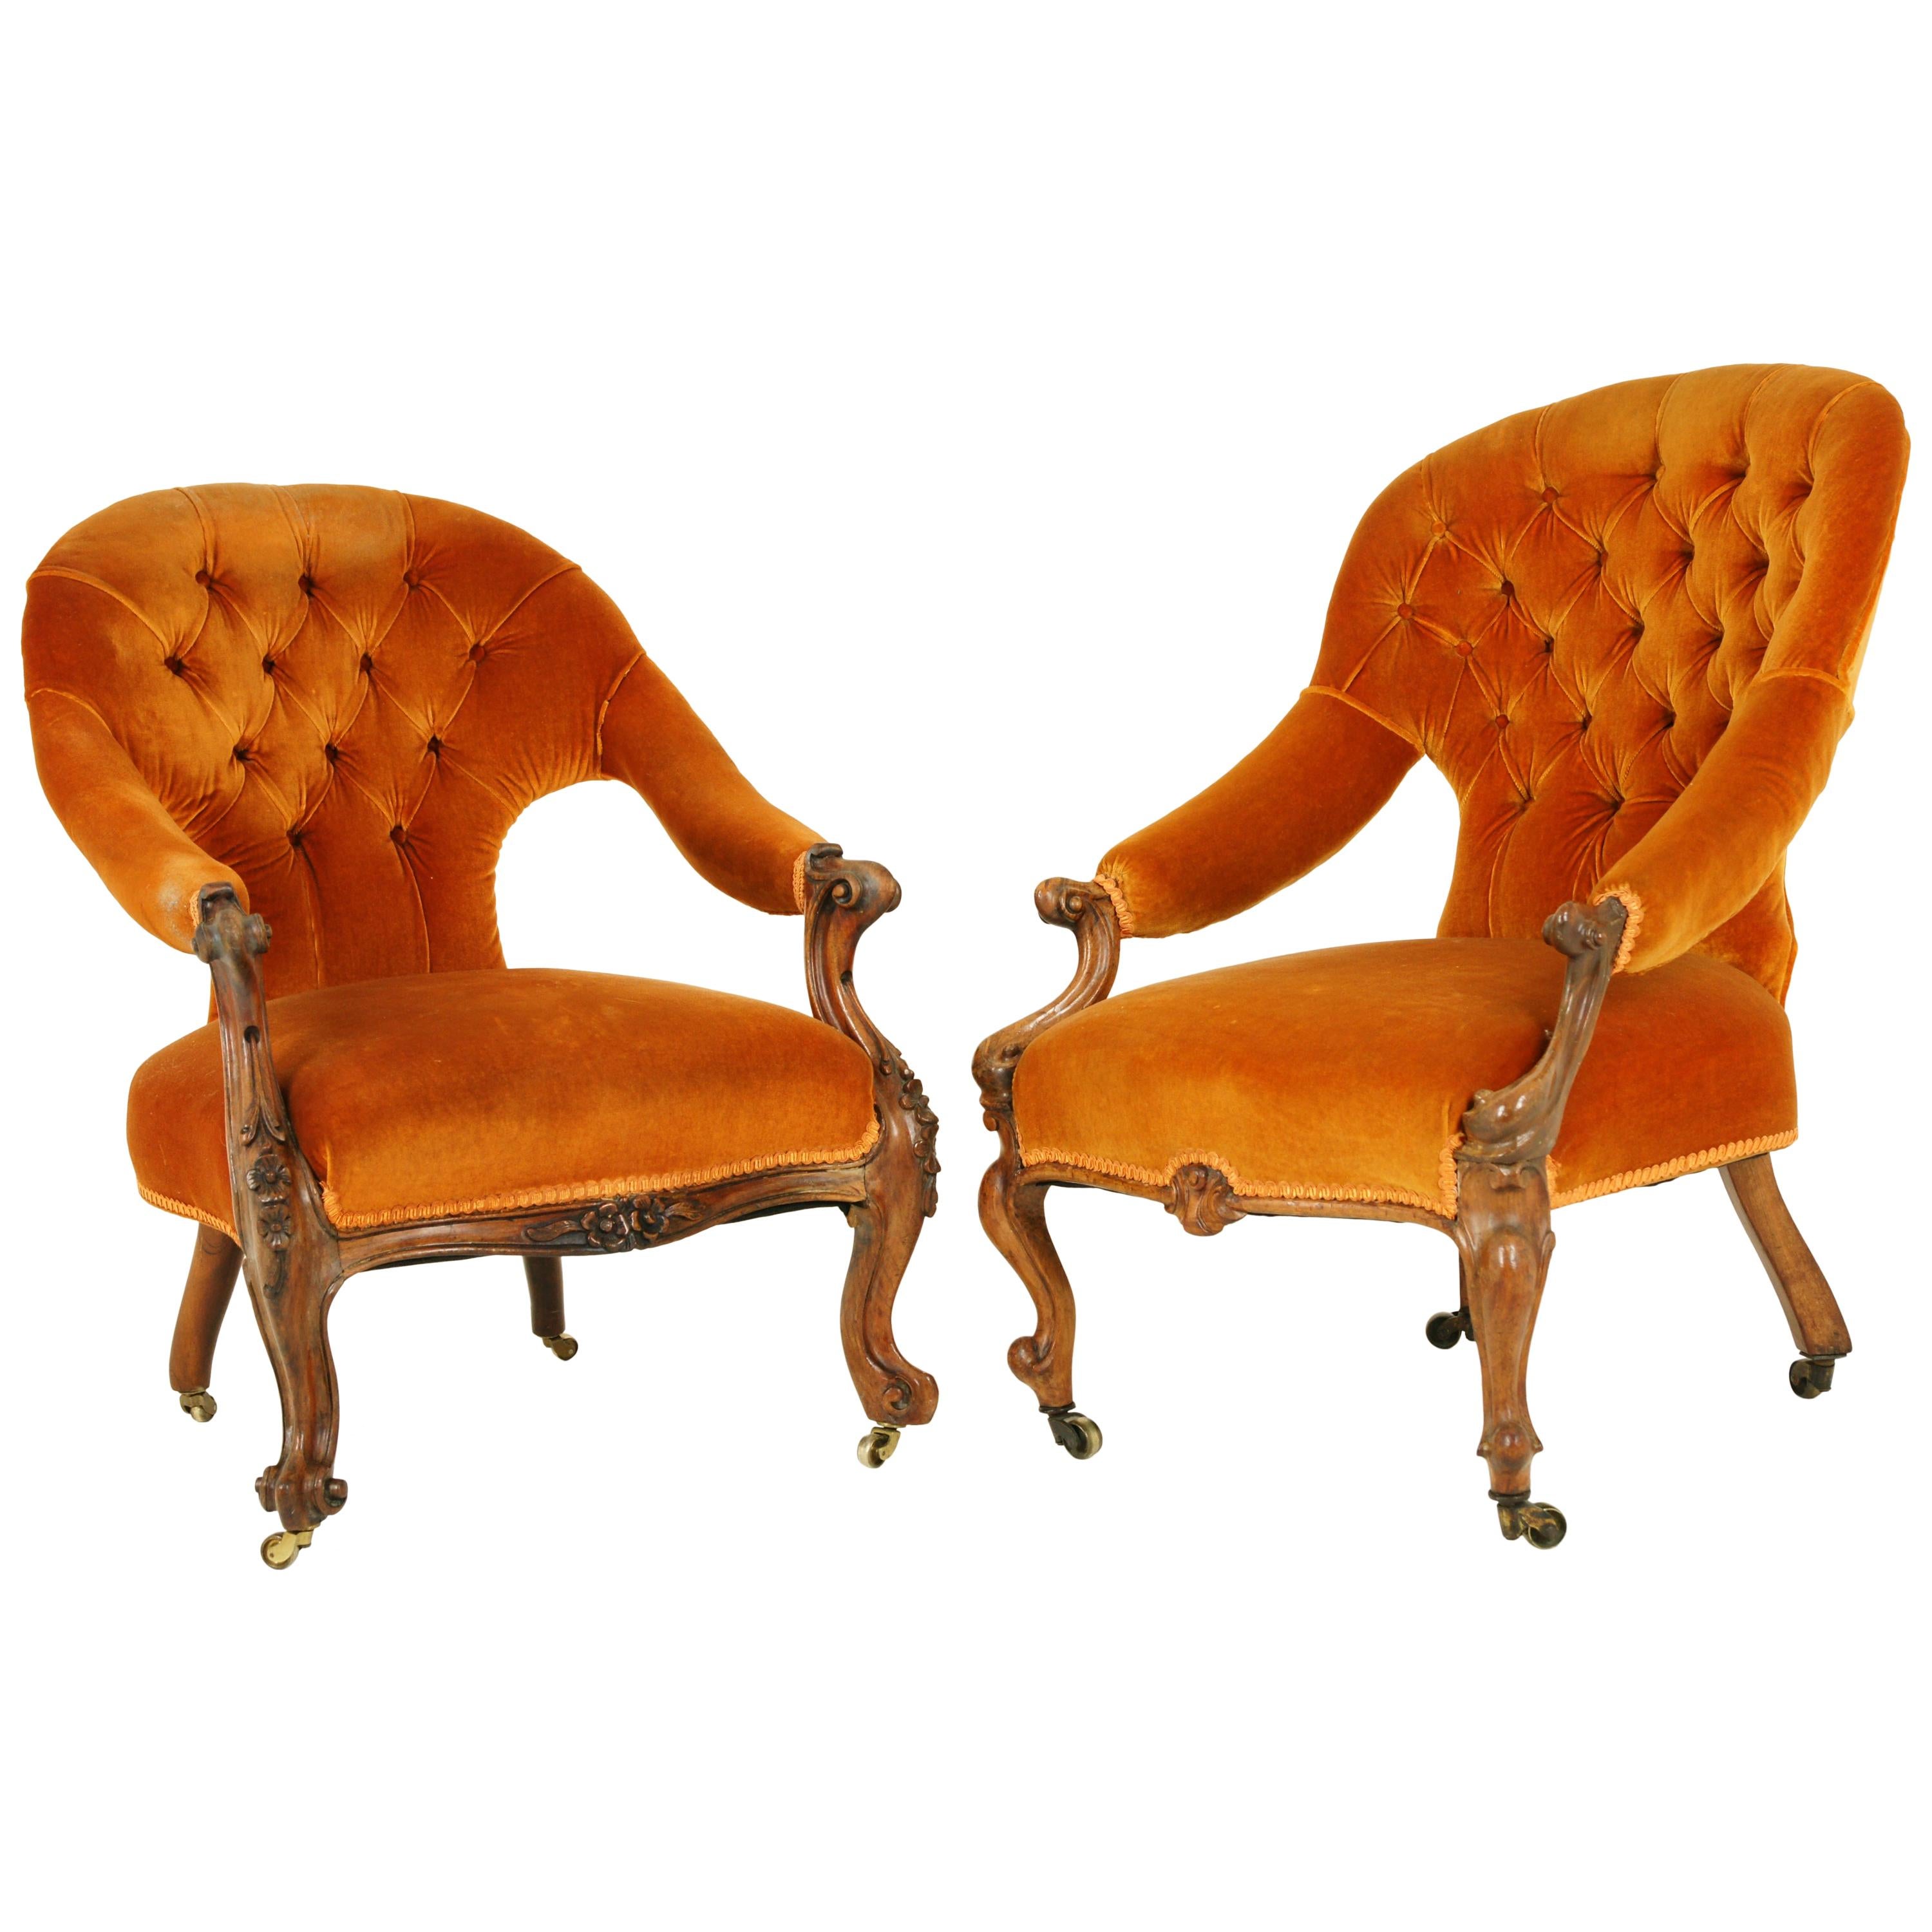 Antique Parlor Chairs, Button Back, Victorian Ladies Chairs, Scotland, 1870